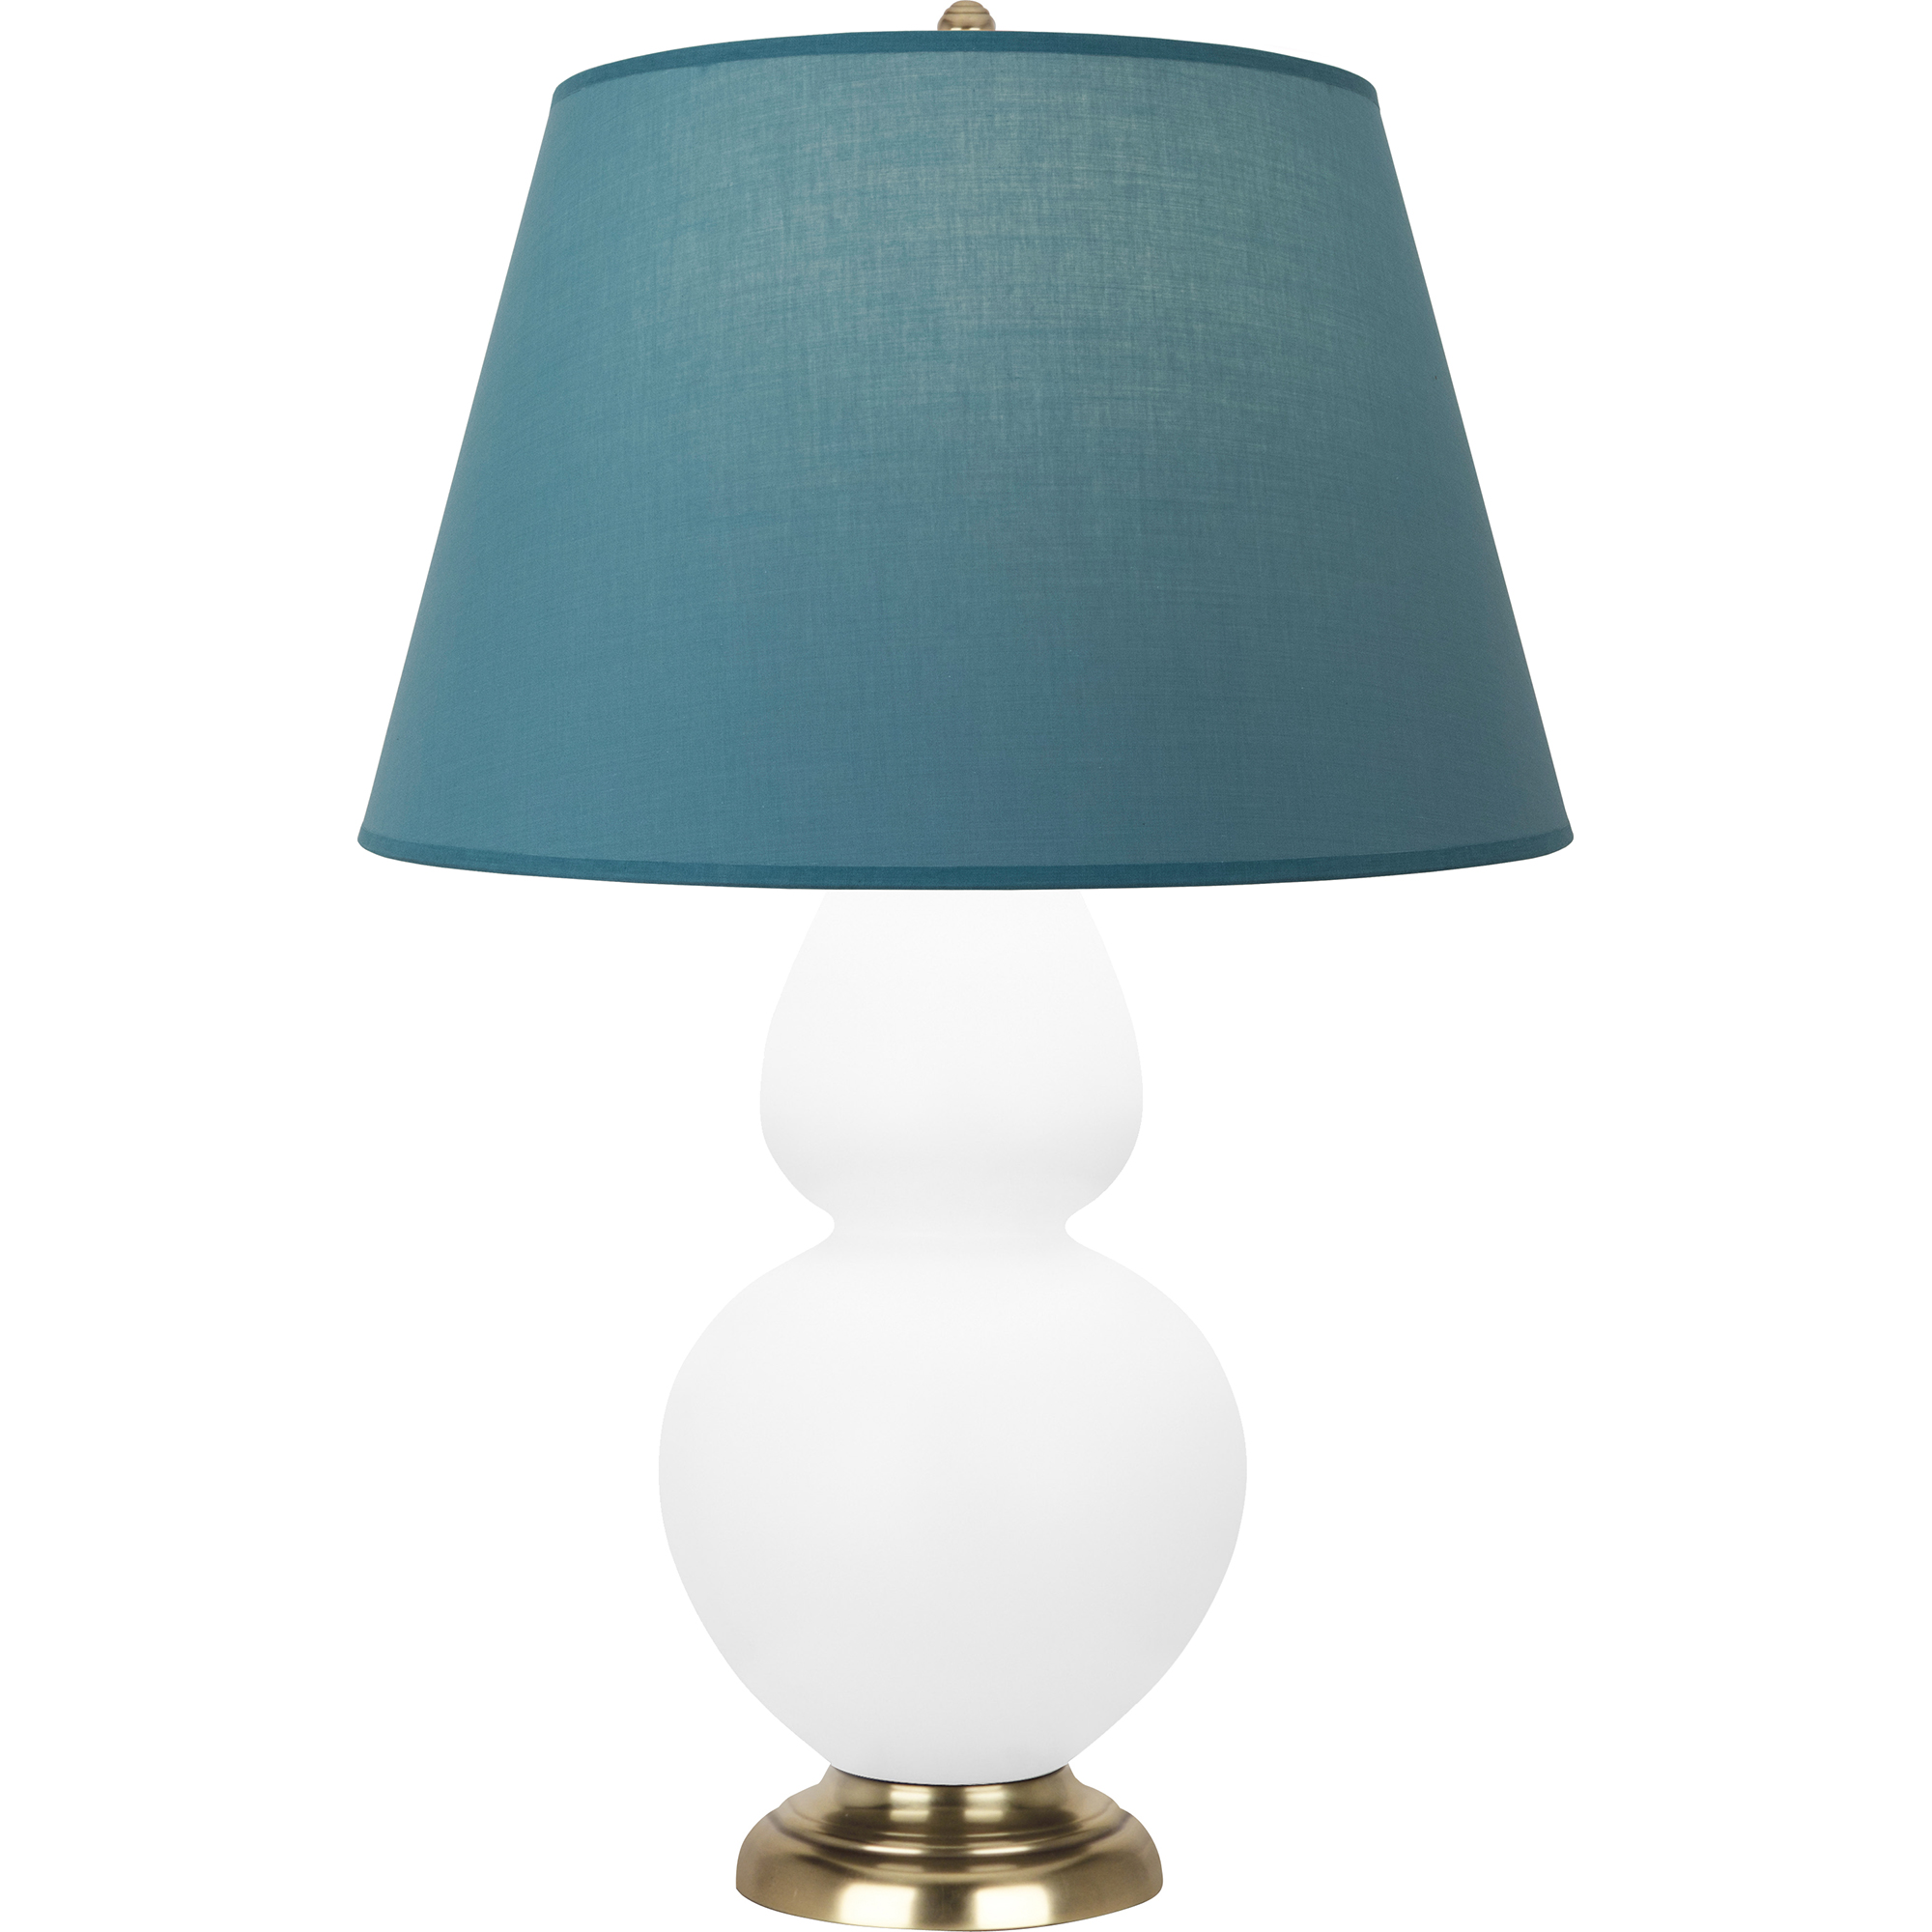 Double Gourd Table Lamp Style #MDY20B